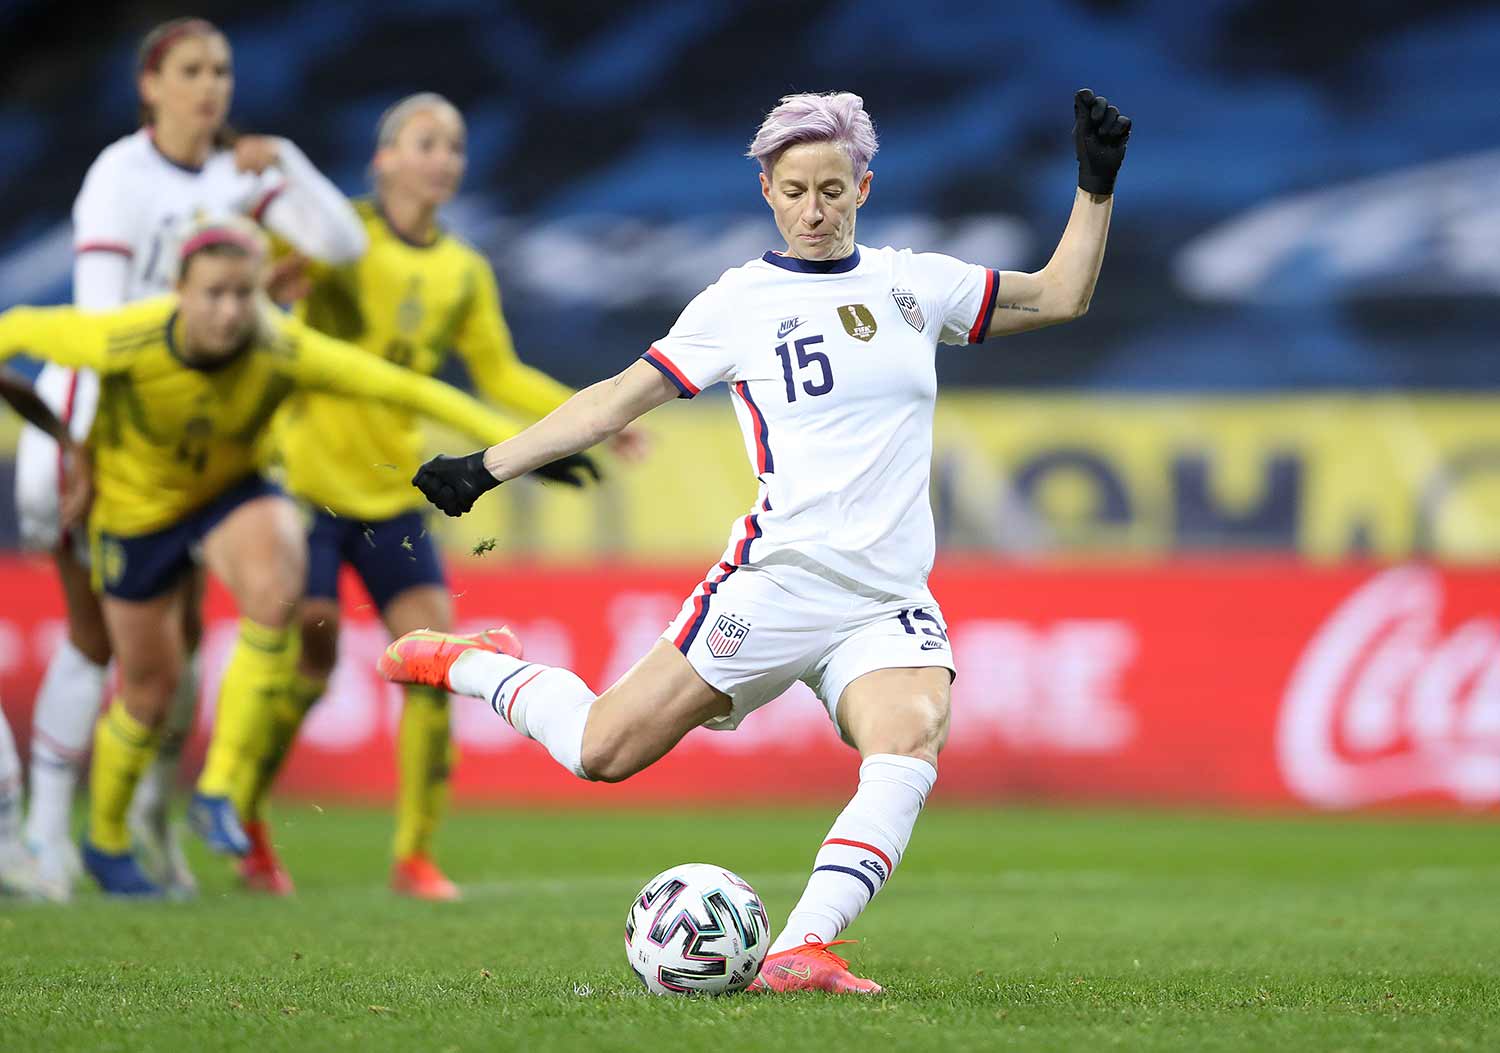 Megan Rapinoe kicking a ball on a soccer field with teammates and members of the opposing team in the background